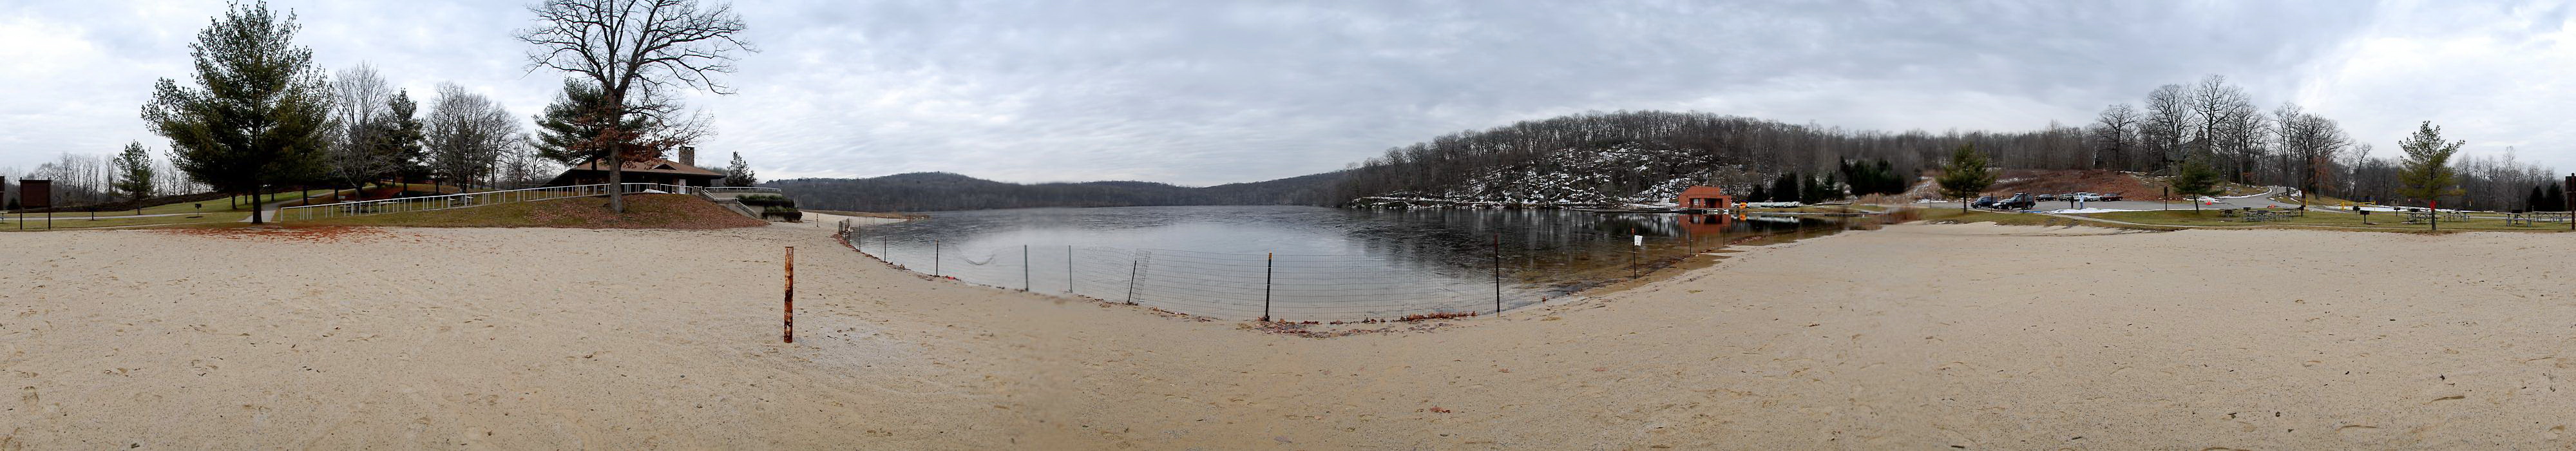 breach, landscape, panoramic, pond, sand, trees, water